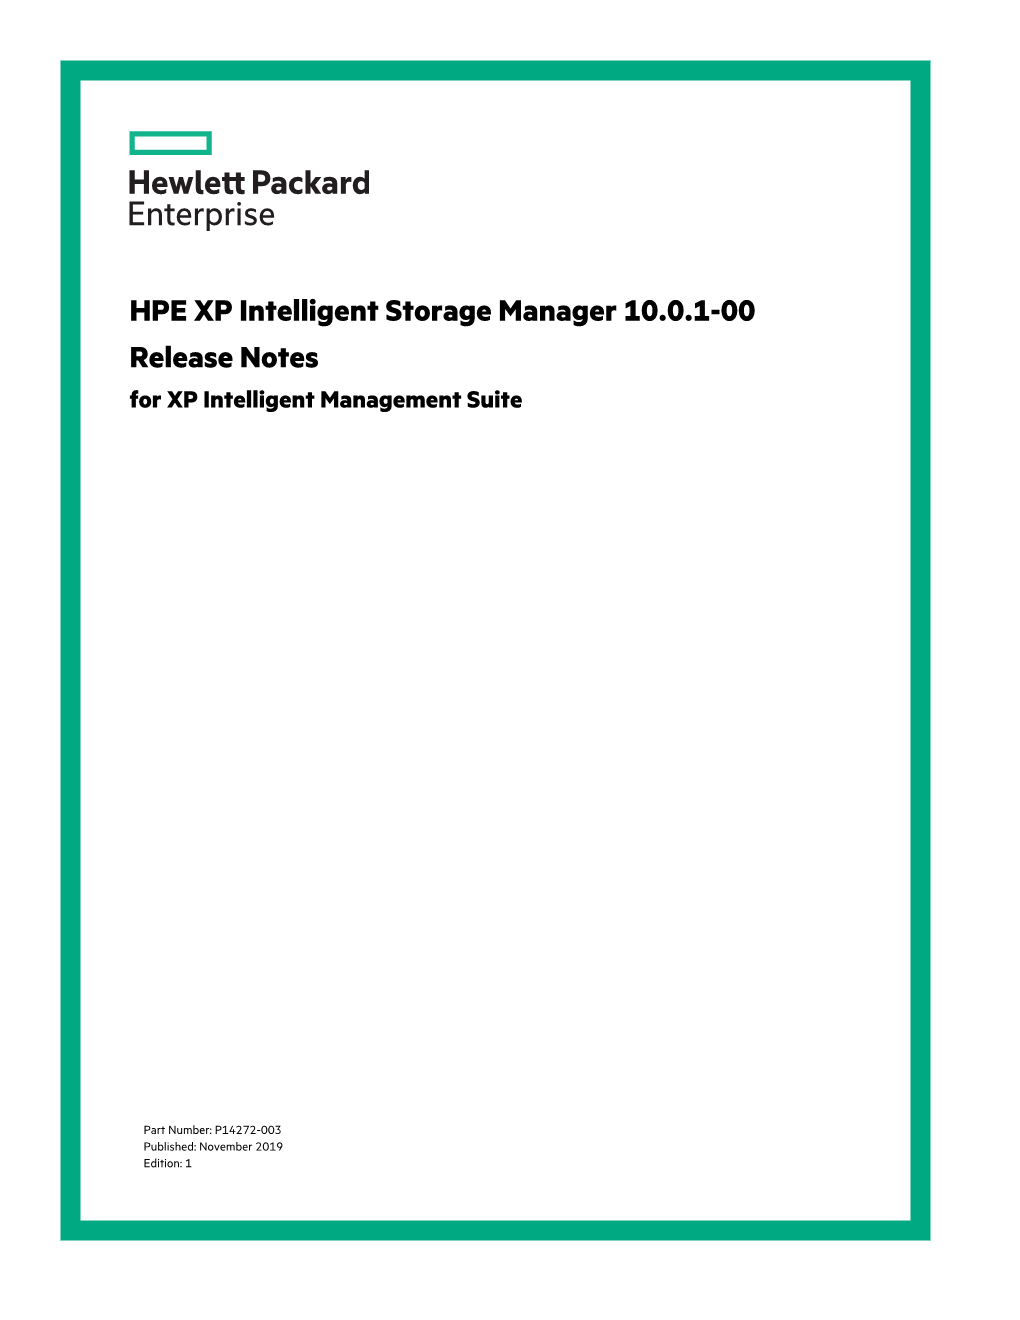 HPE XP Intelligent Storage Manager 10.0.1-00 Release Notes for XP Intelligent Management Suite